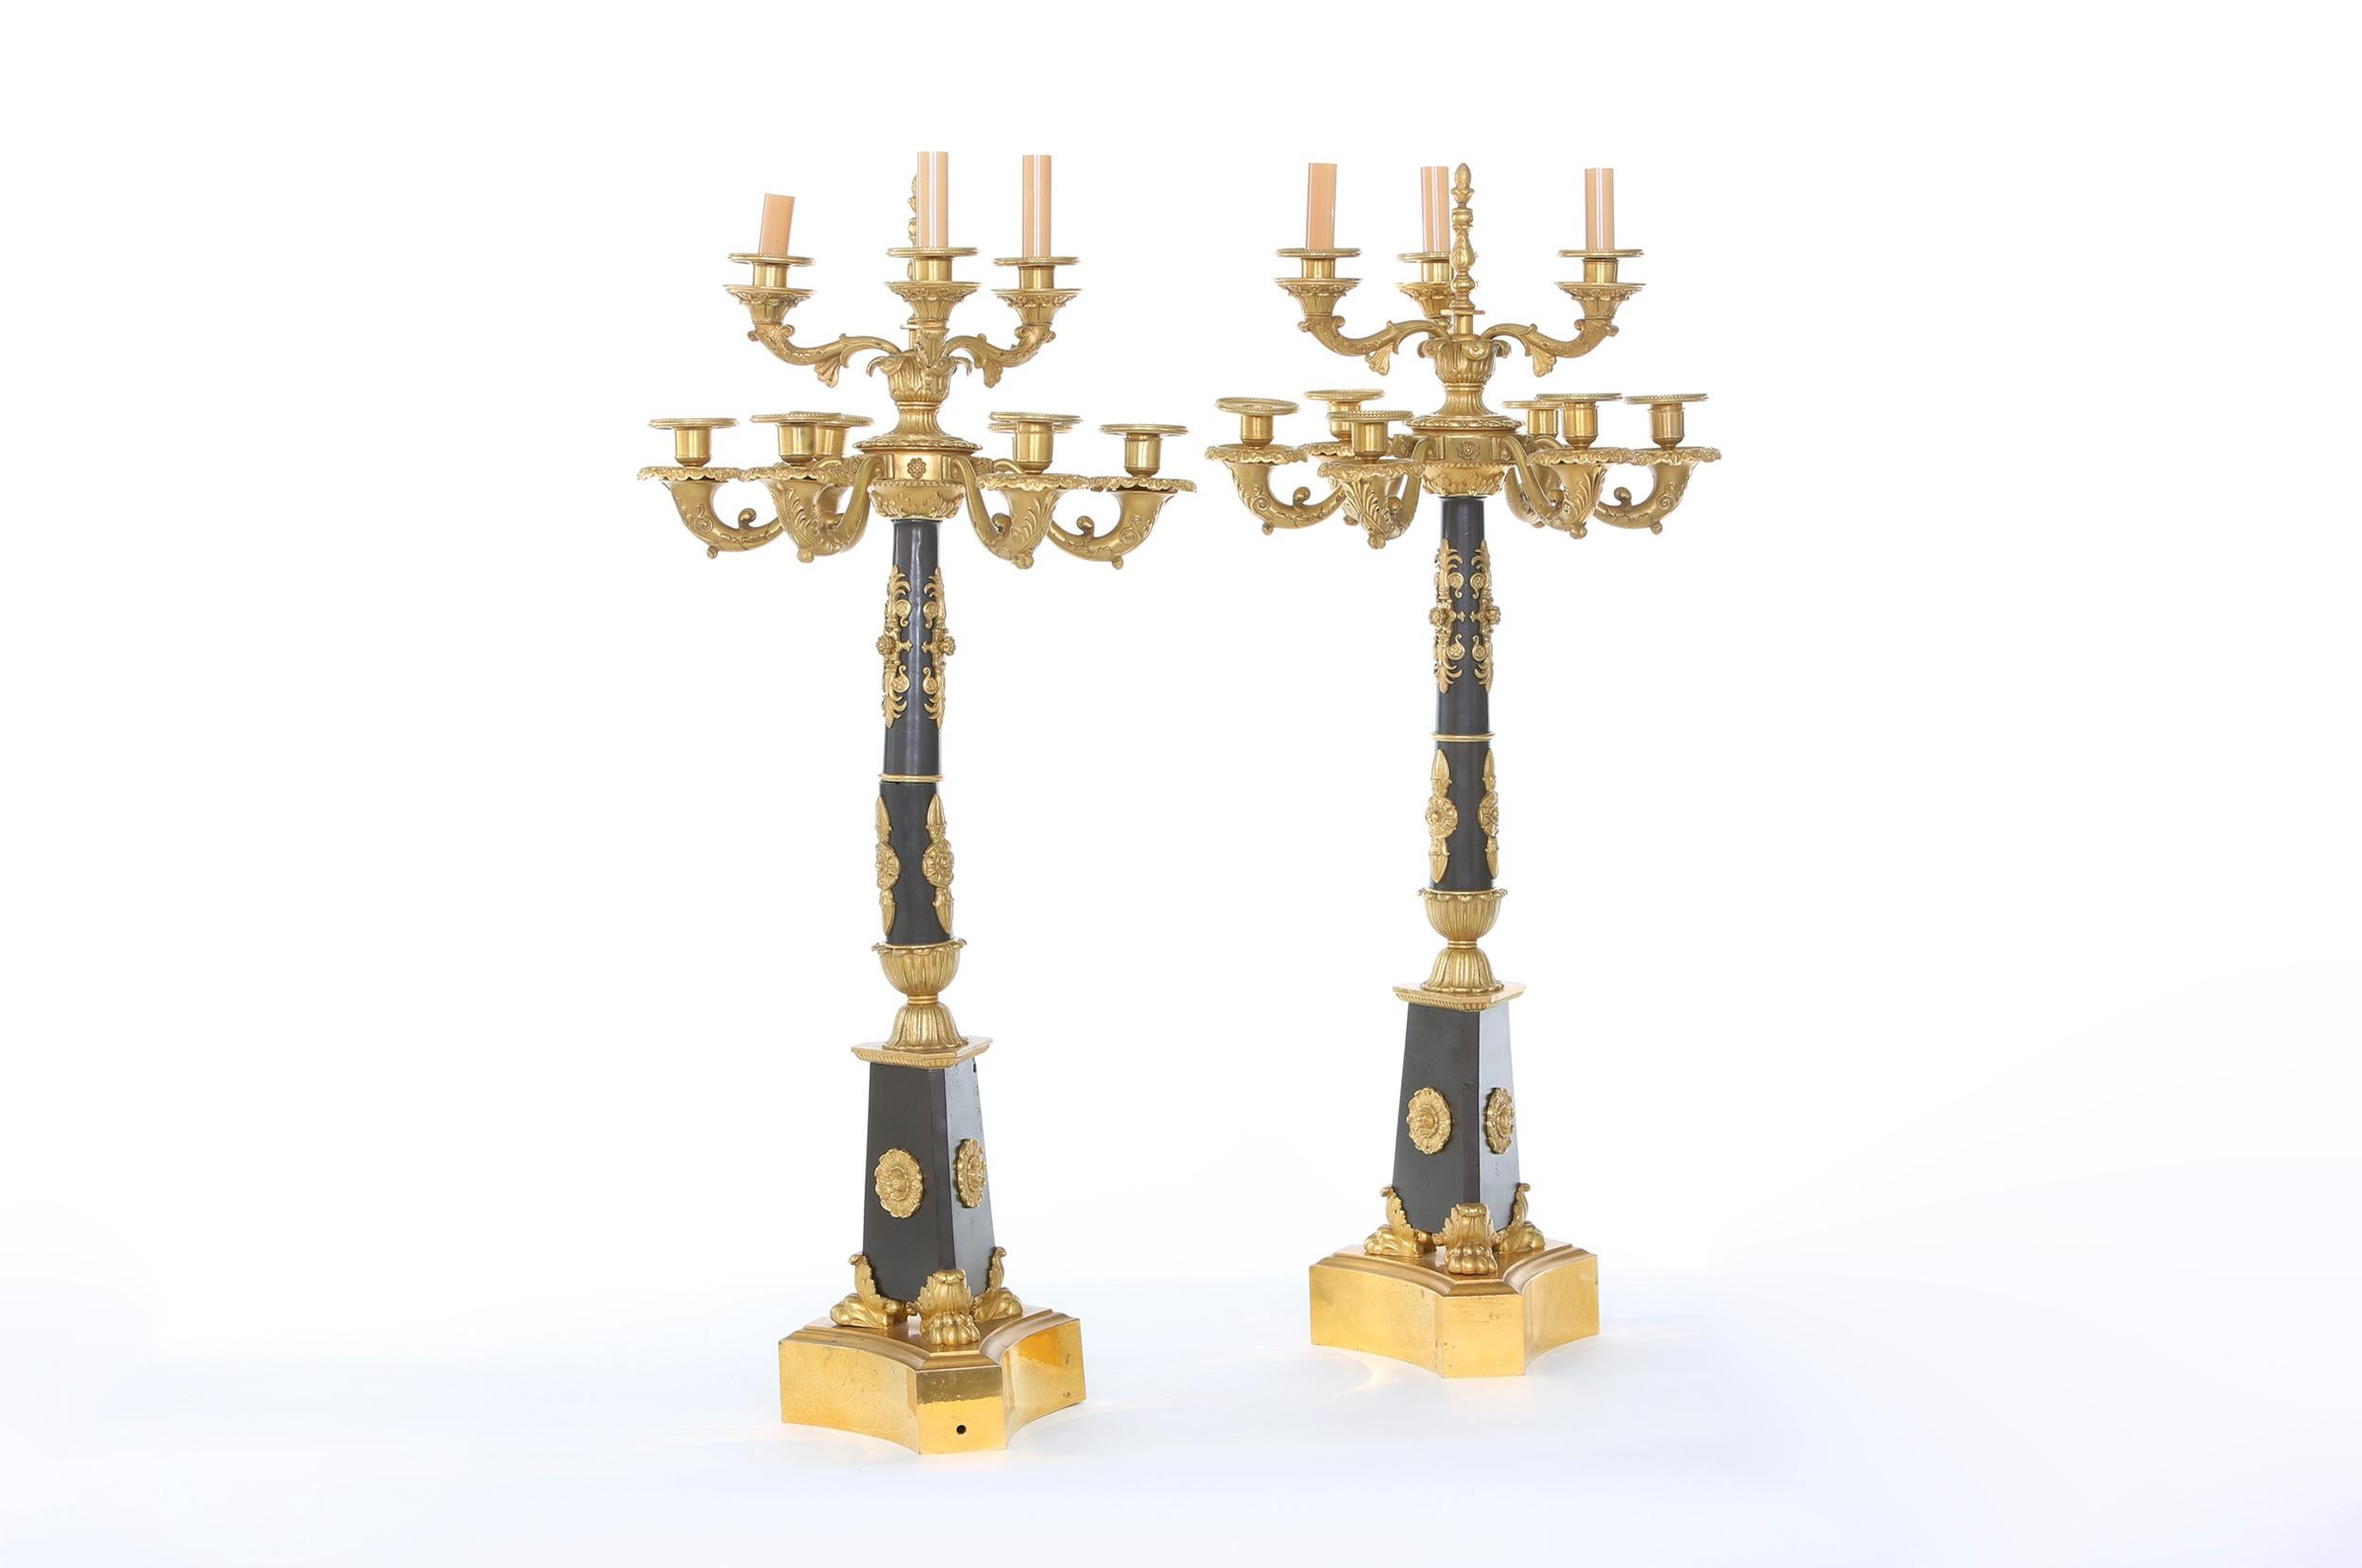 Impressive French Empire style gilt bronze nine-light torchieres / candelabras with exterior design details raised on a tripart concave plinth. The torchiere is in great condition. Minor wear consistent with age / use. Each one stand about 36 inches